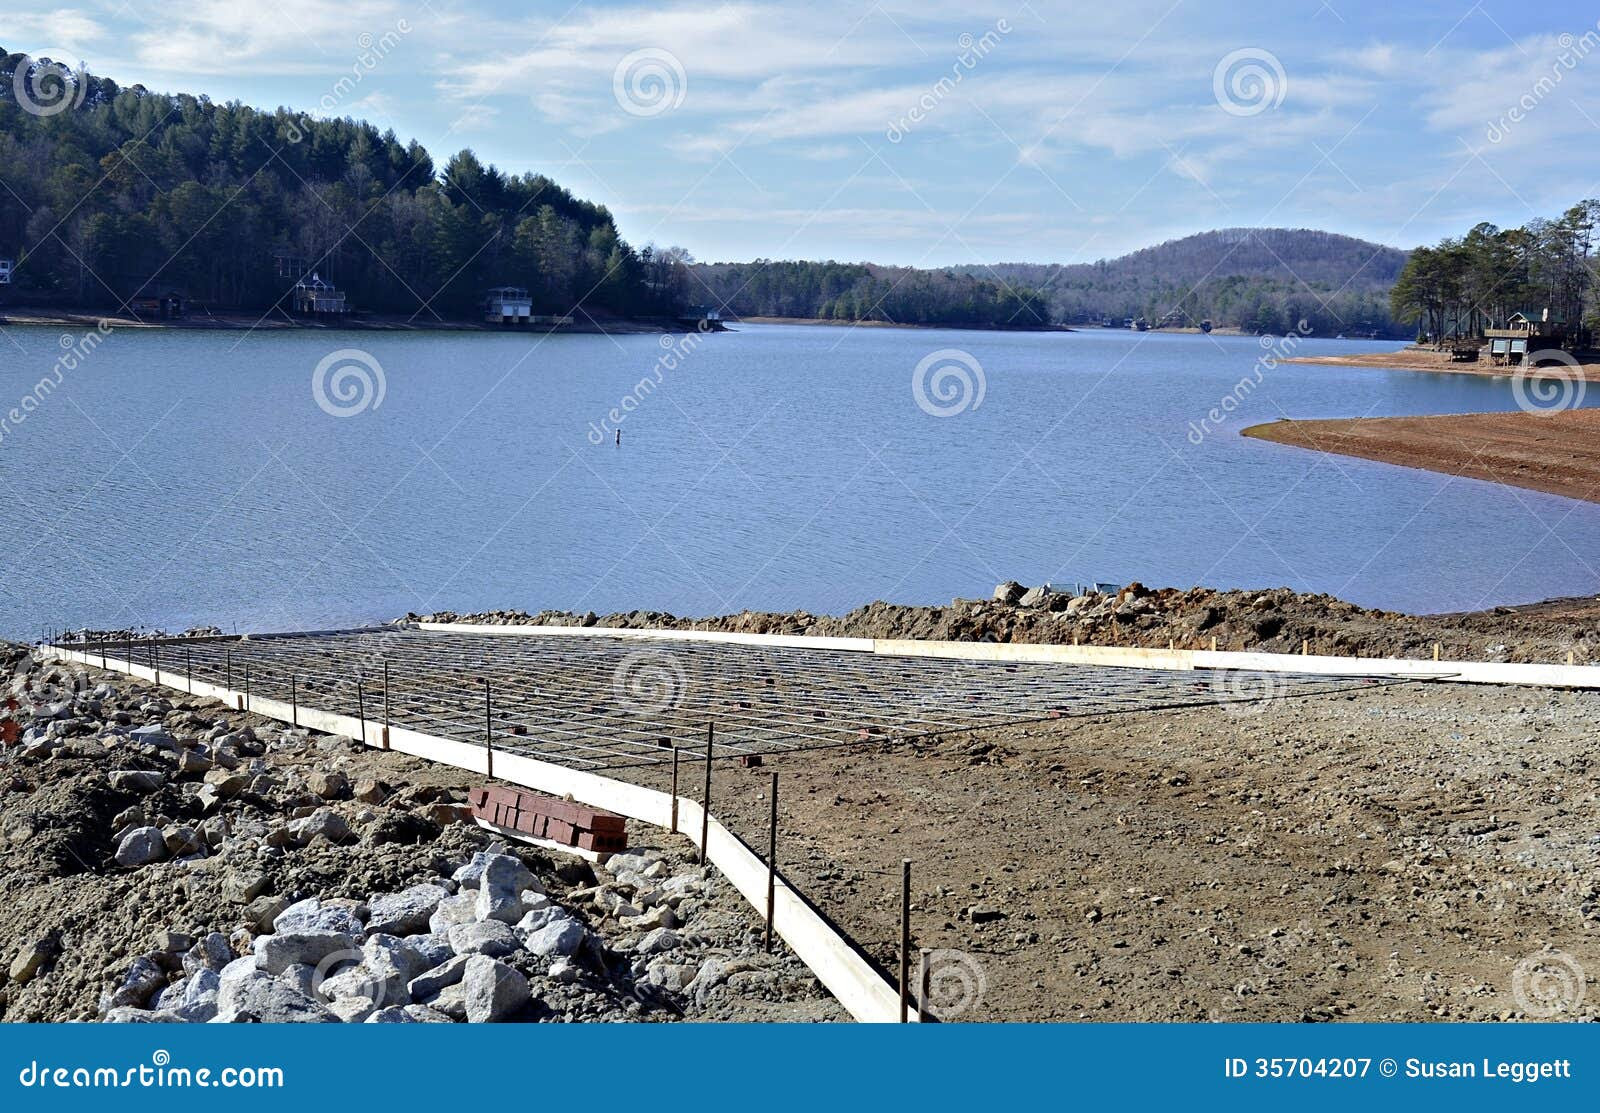 Build Your Own Boat Ramp Images - Frompo